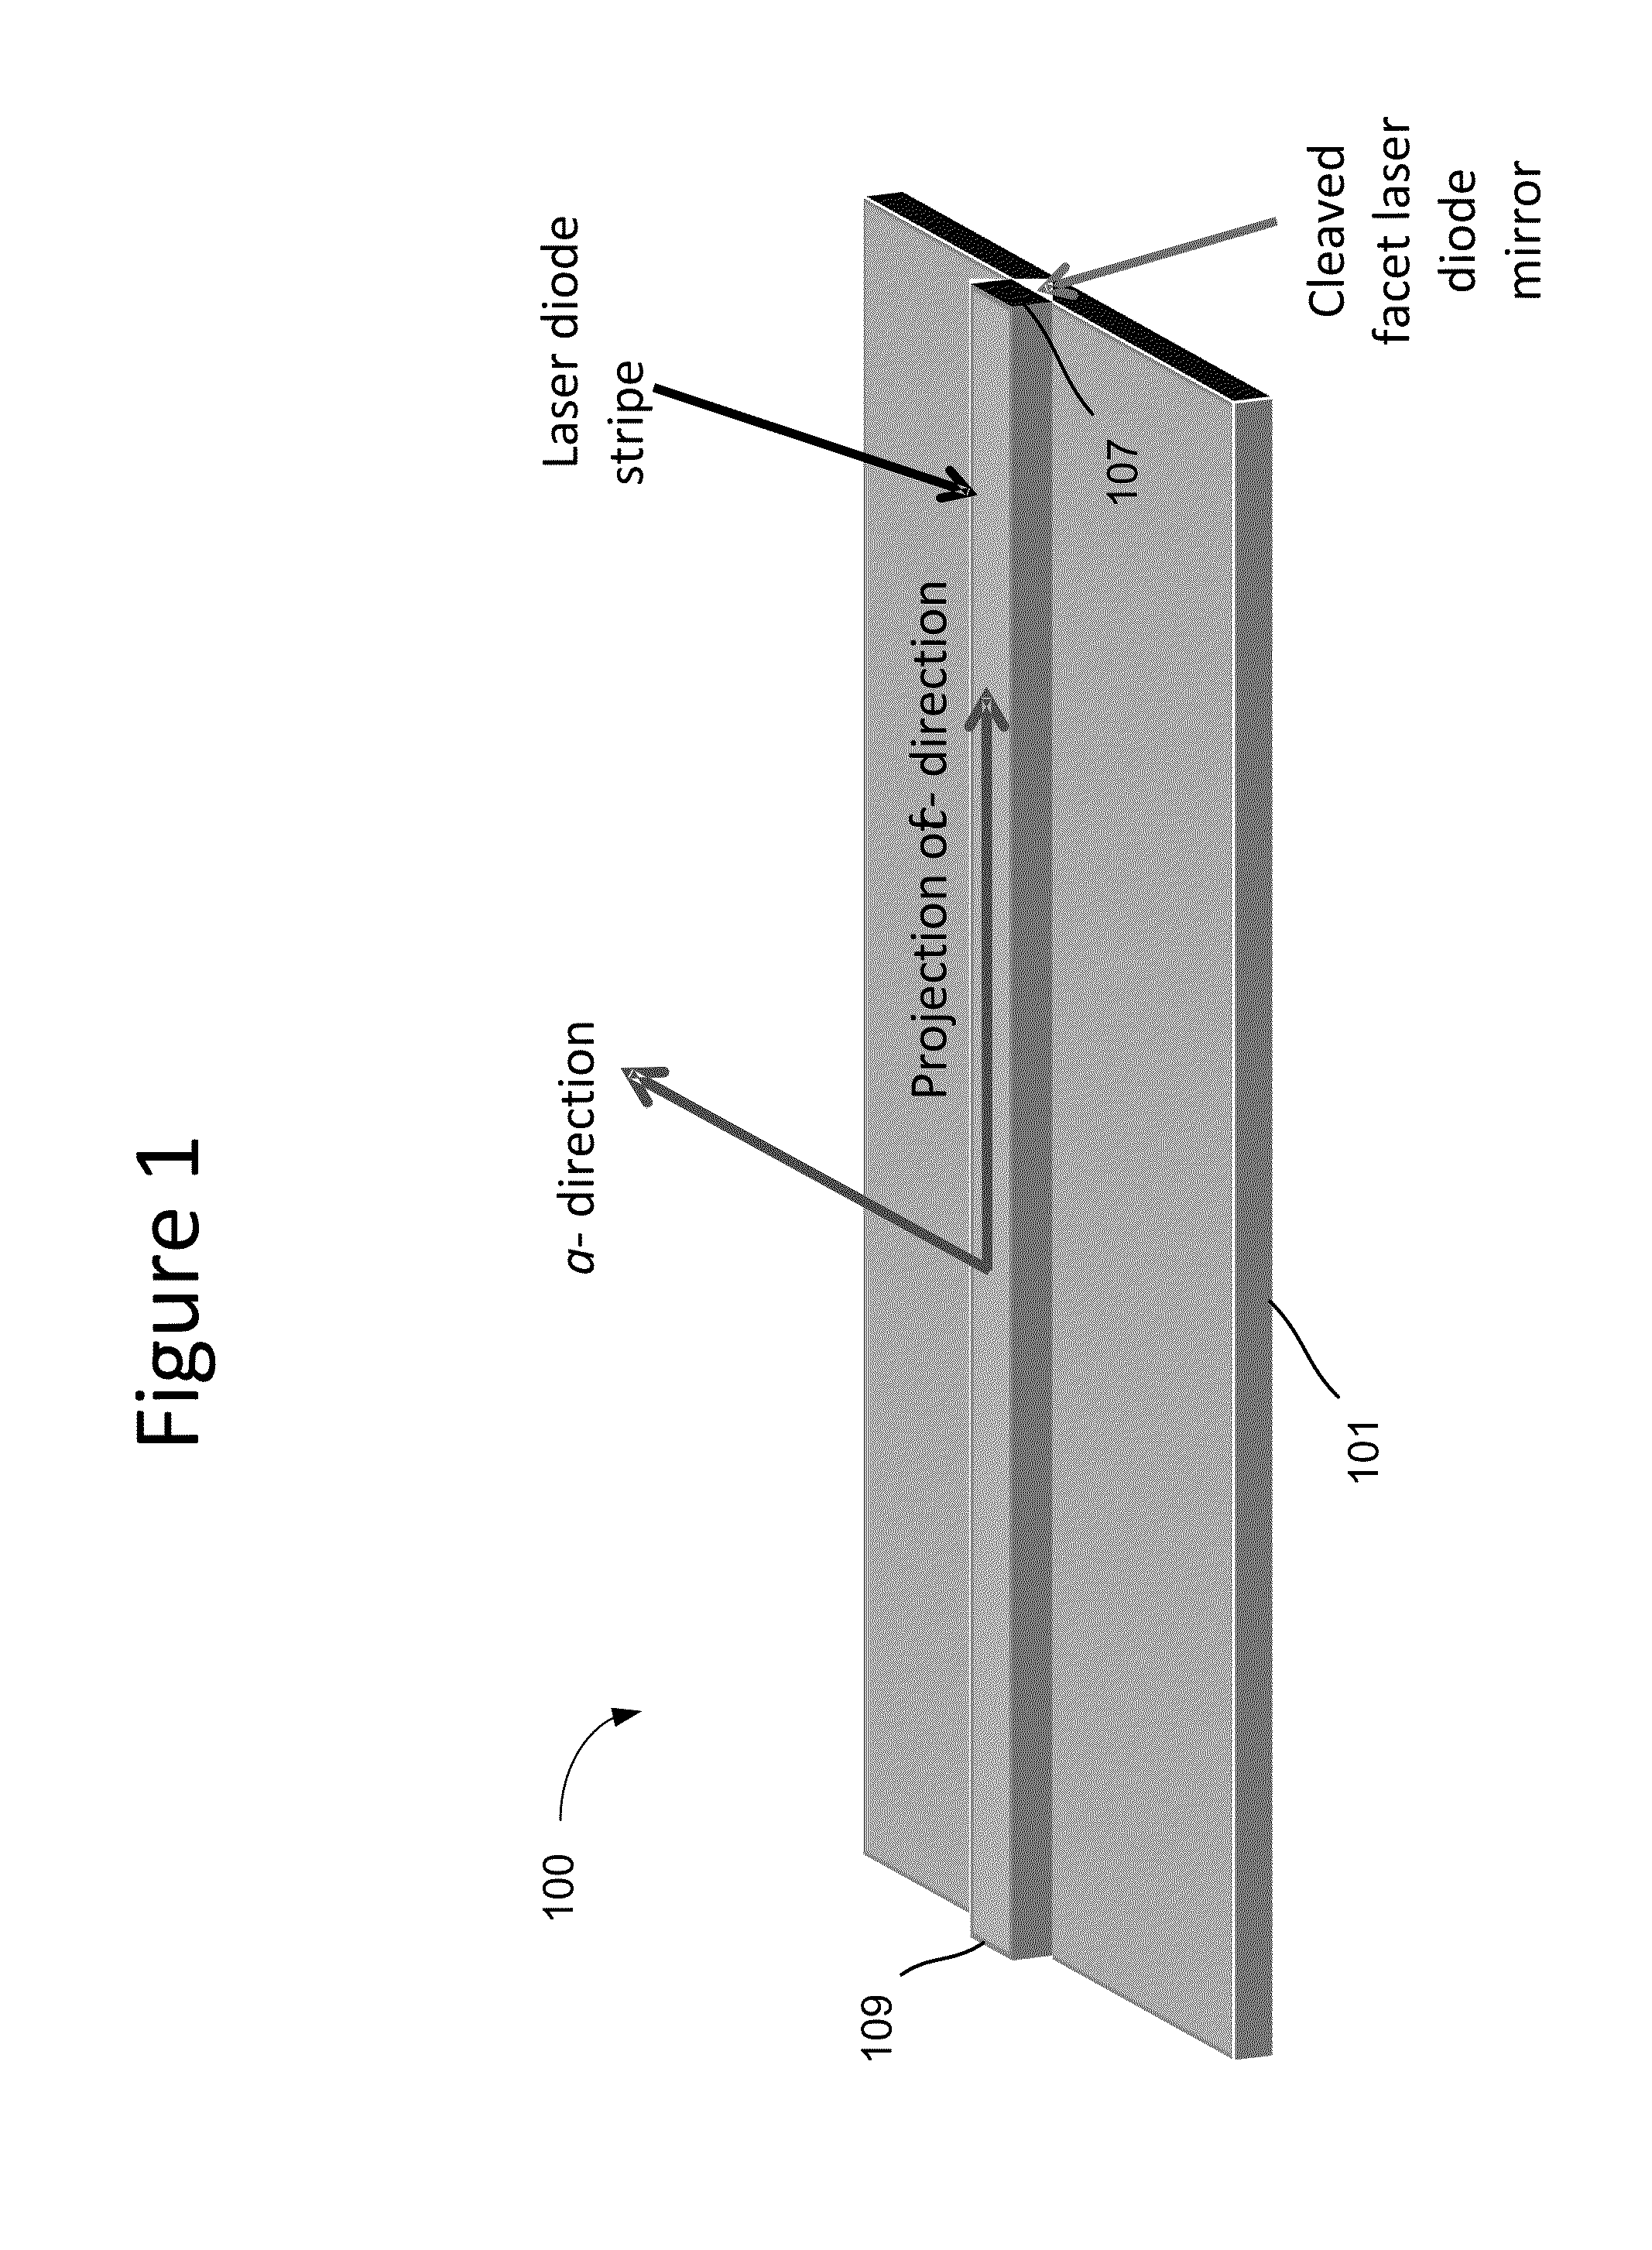 Laser diodes with scribe structures